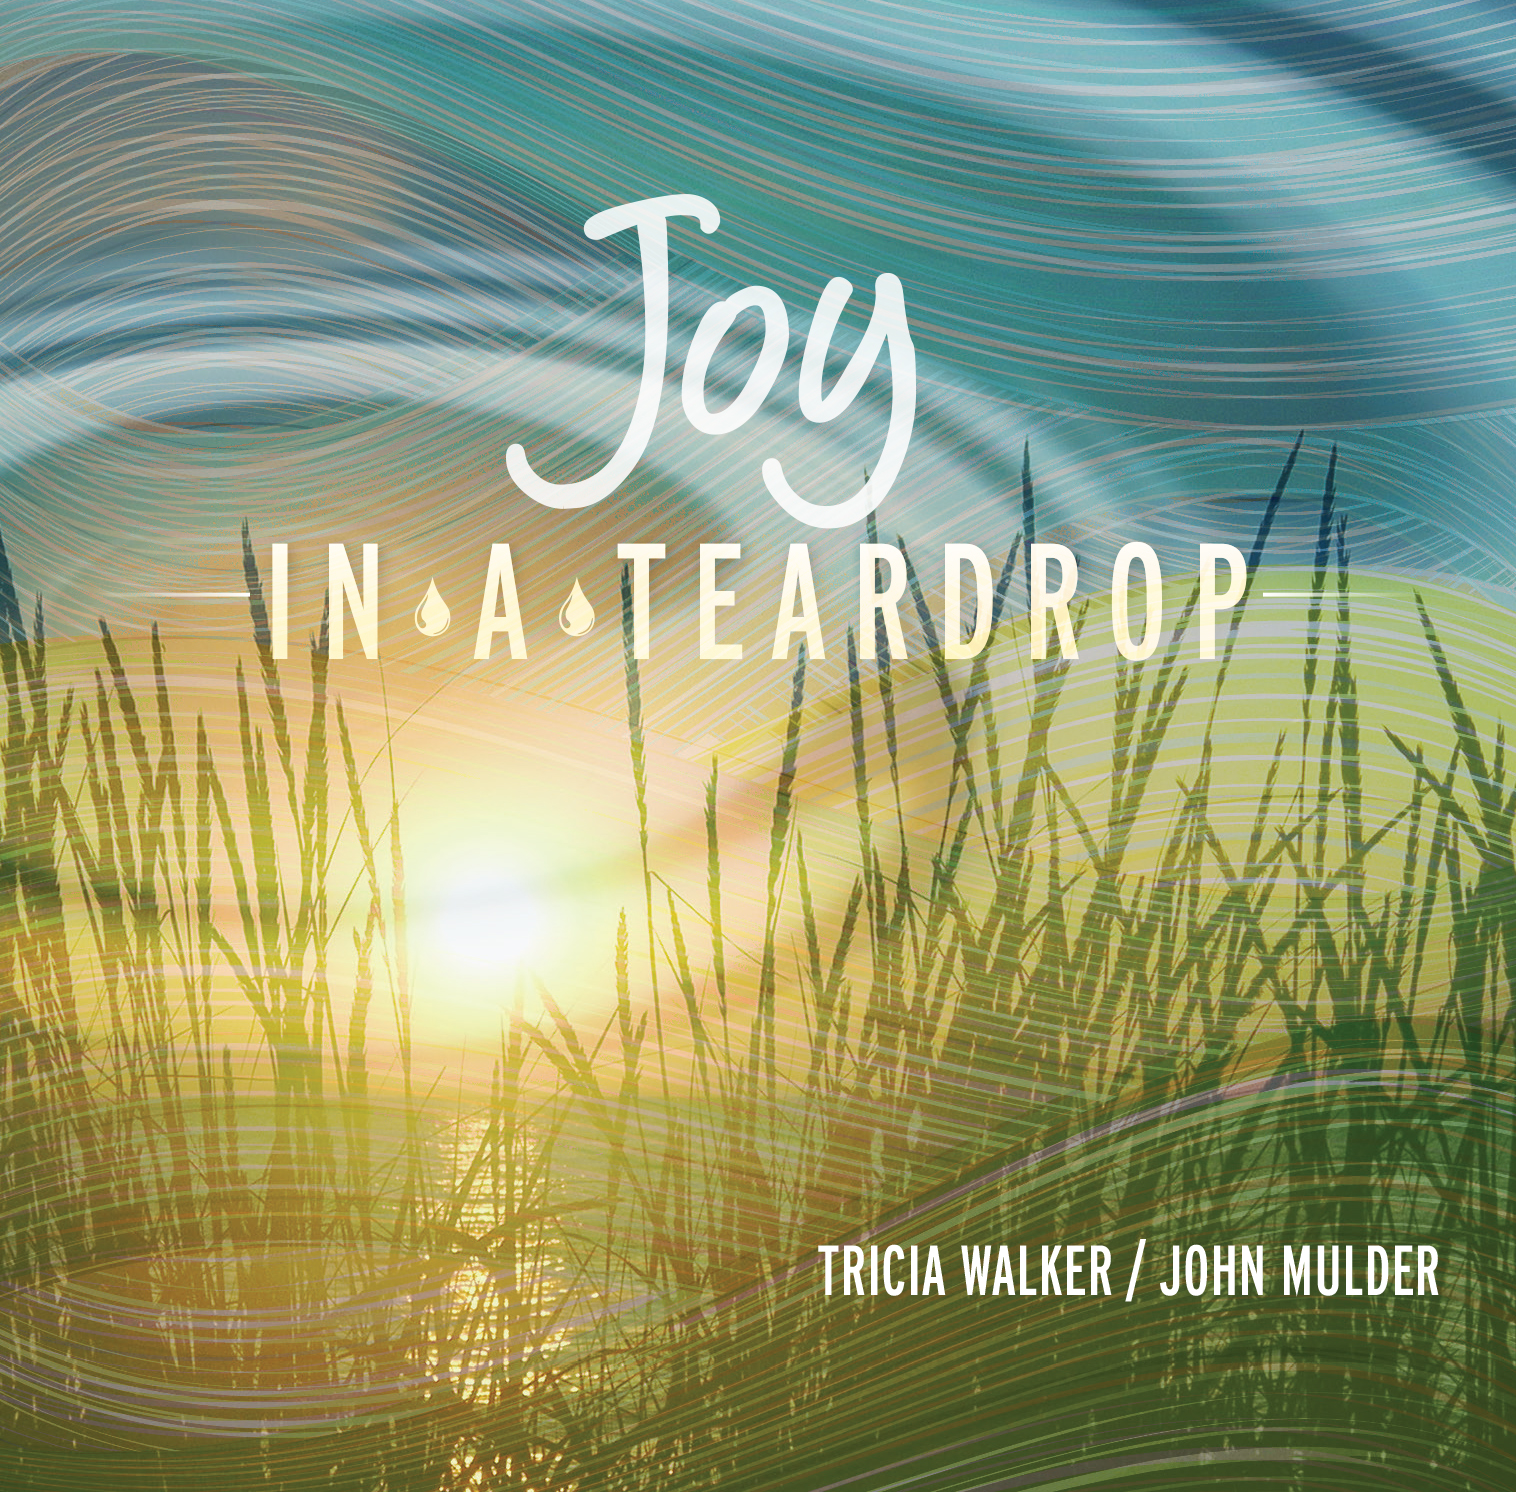 Spurred on by the hospice community’s positive response to Joy in a Teardrop, NHPCO is launching a  new program, "Joy in a Teardrop: The Hospice Music Project," which will result in a full album of songs that reflect the experience of hospice professionals in the work that they do 